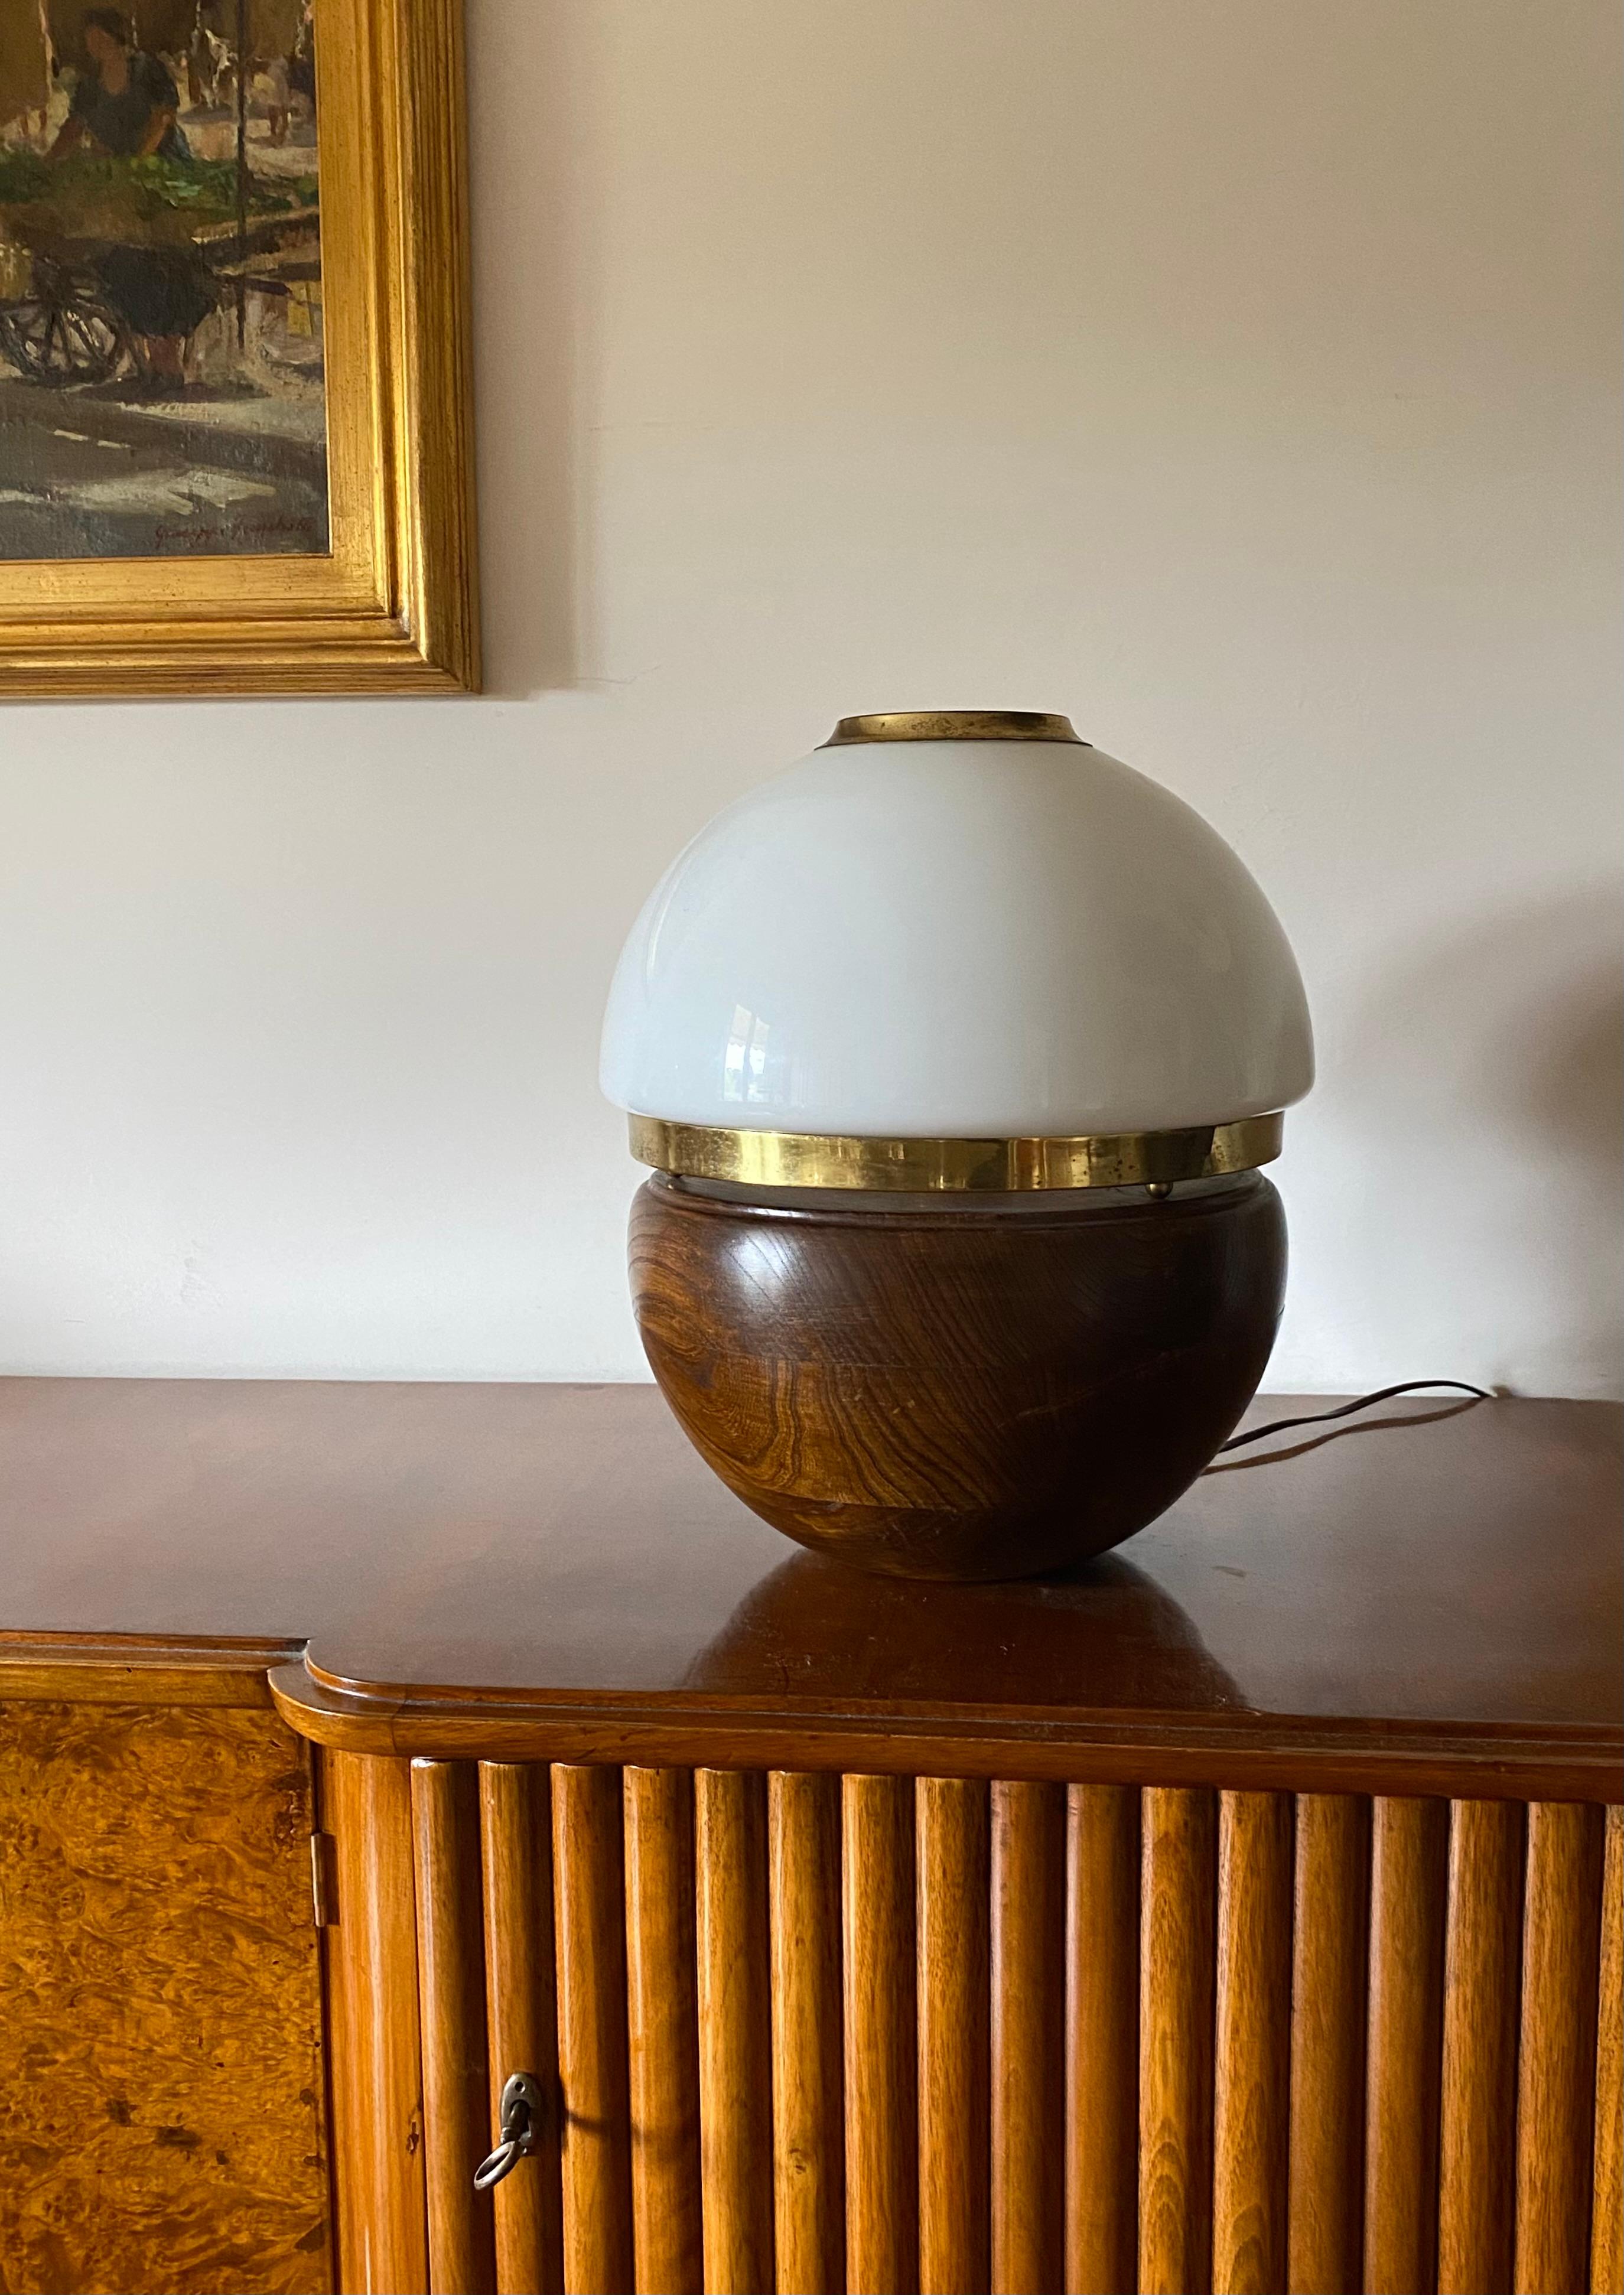 Table lamp, Luigi Caccia Dominioni

produced by Azucena, Italy 1970s 

Wood, opaline glass. Brass details

H 41 cm - 36 cm diam. 

Conditions: excellent, in working conditions.